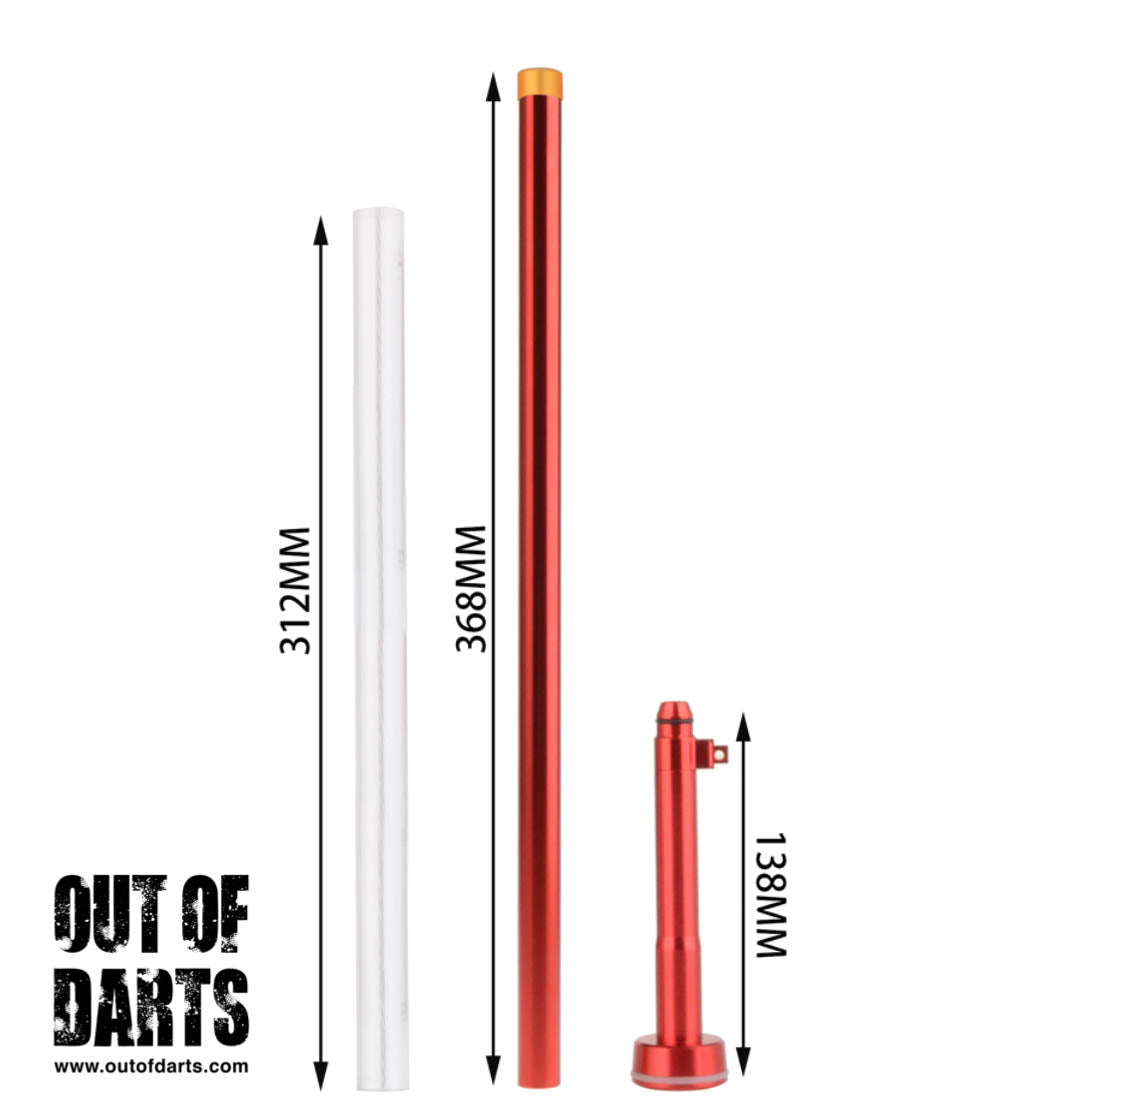 Worker Short Dart Tube Kit for Longshot / Terminator (Two Color Options) CLOSEOUT